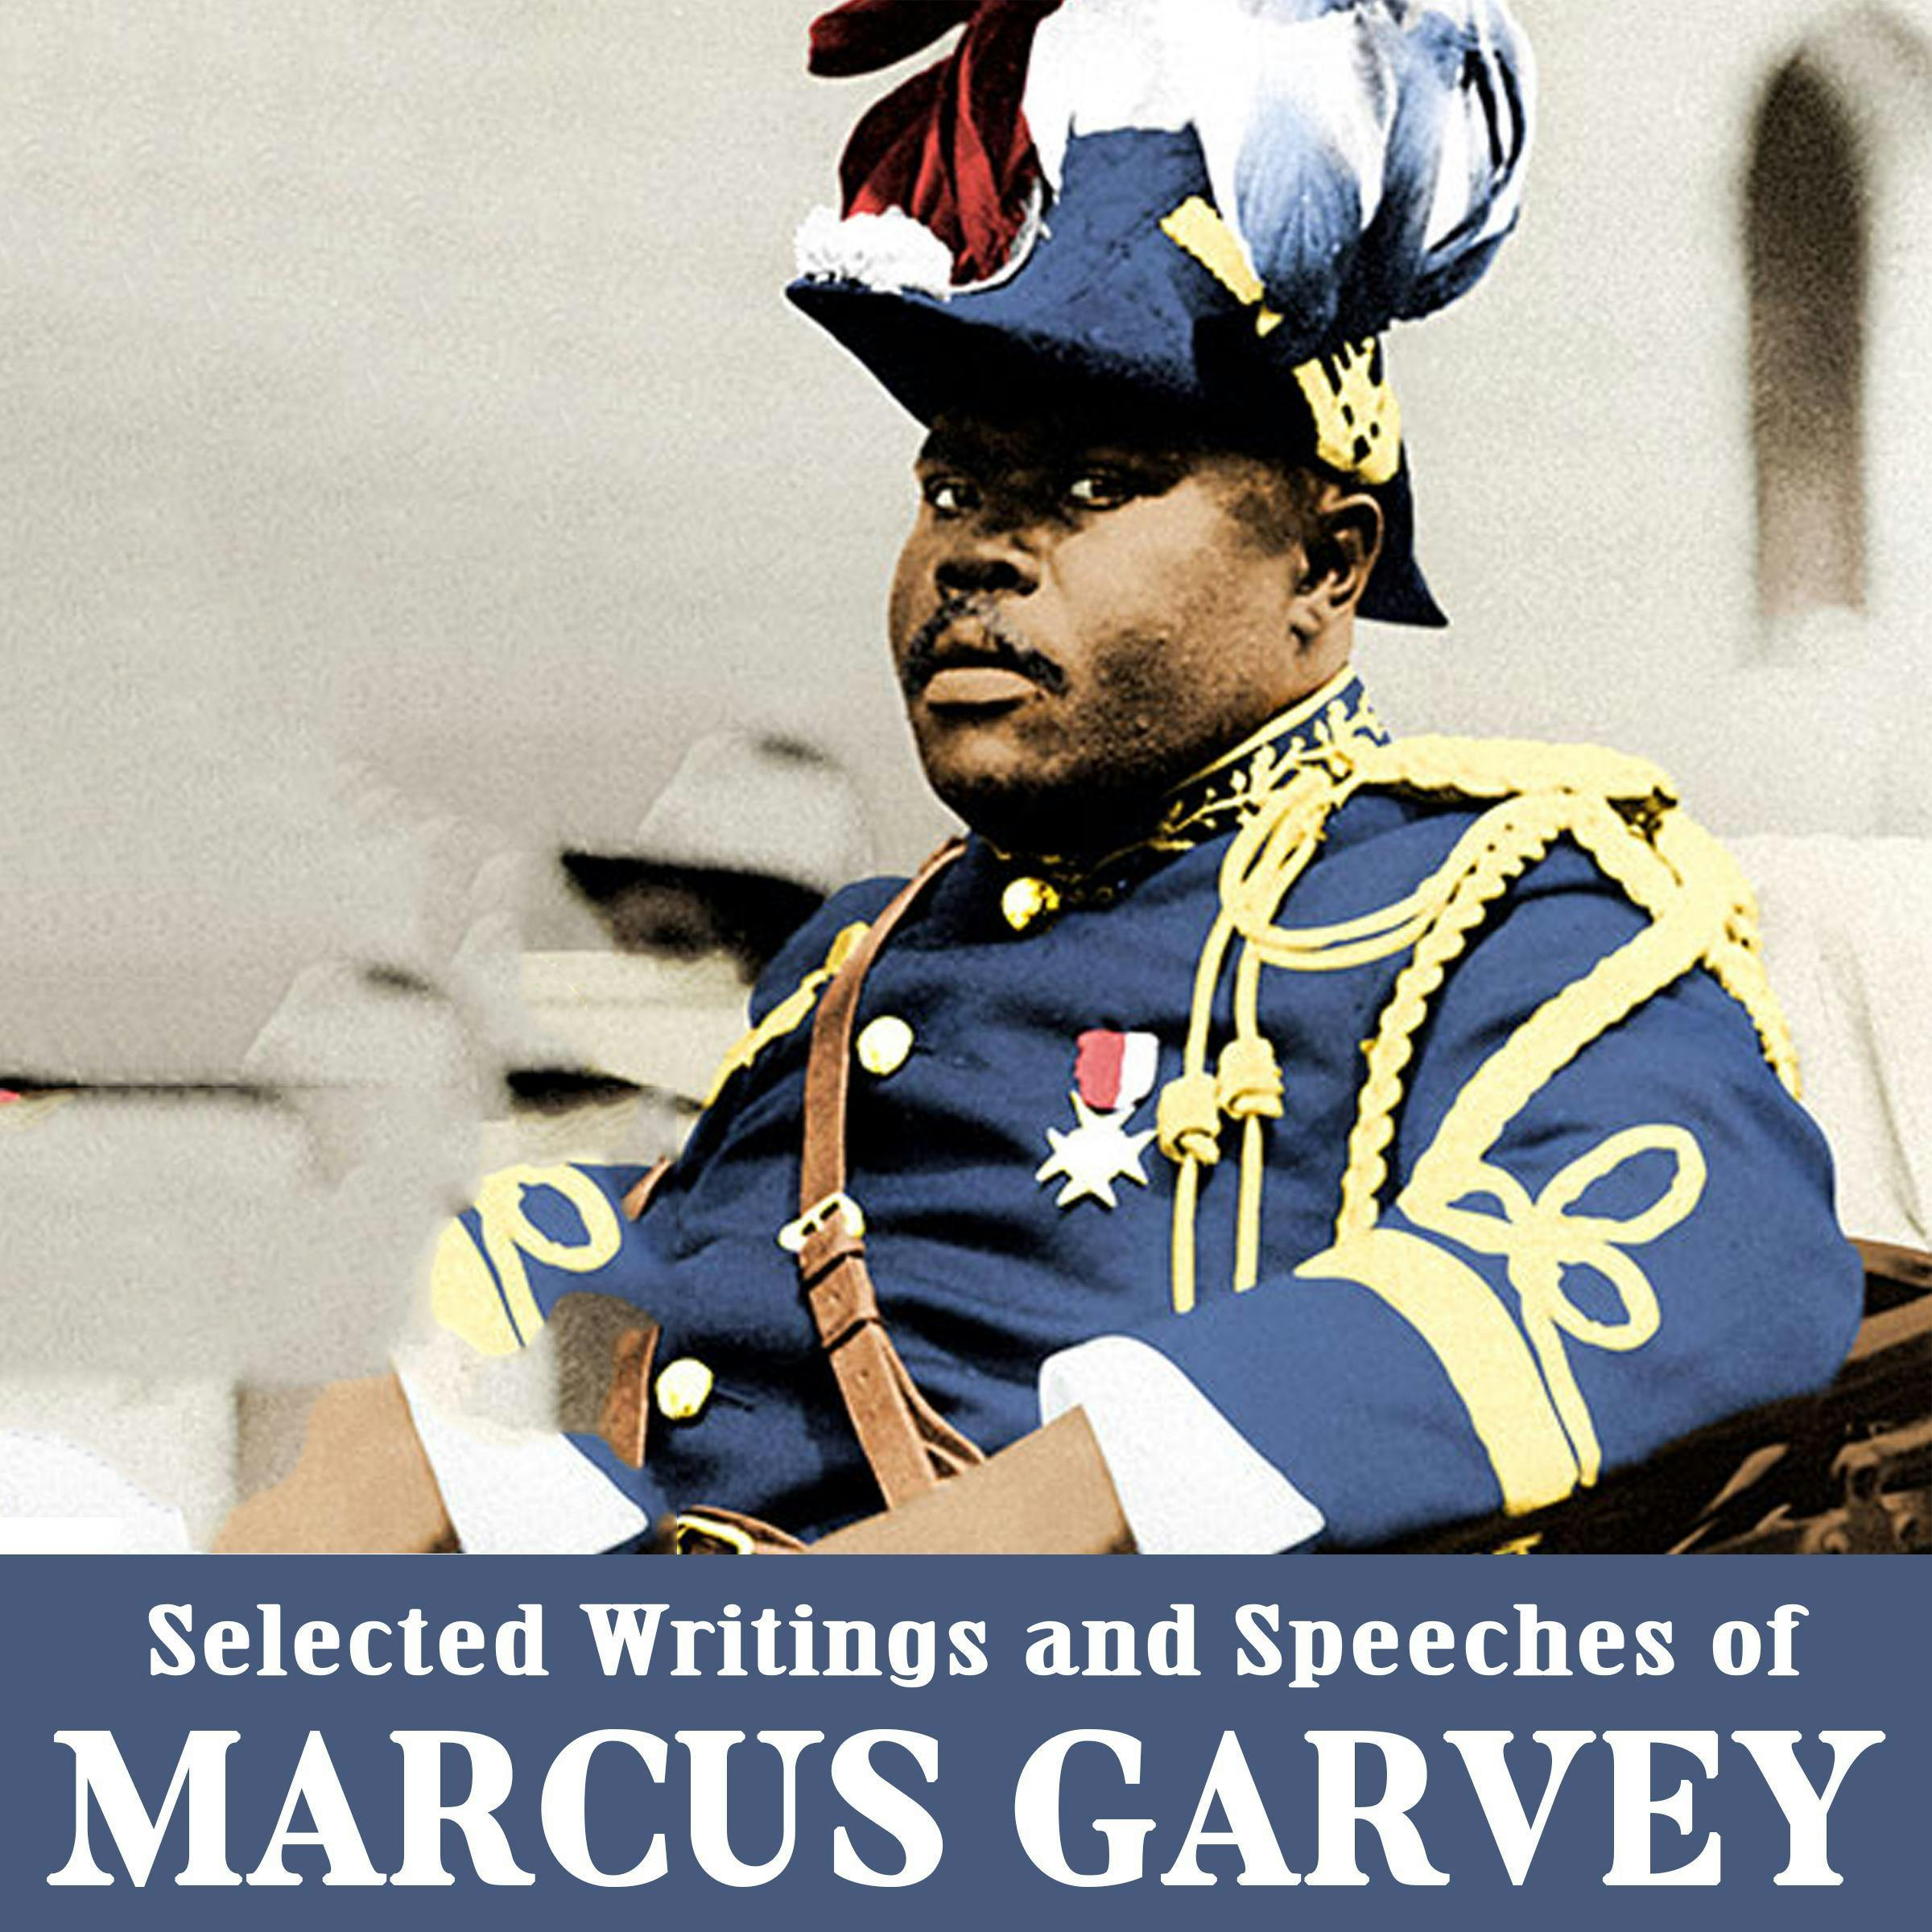 Selected Writings and Speeches of Marcus Garvey - undefined